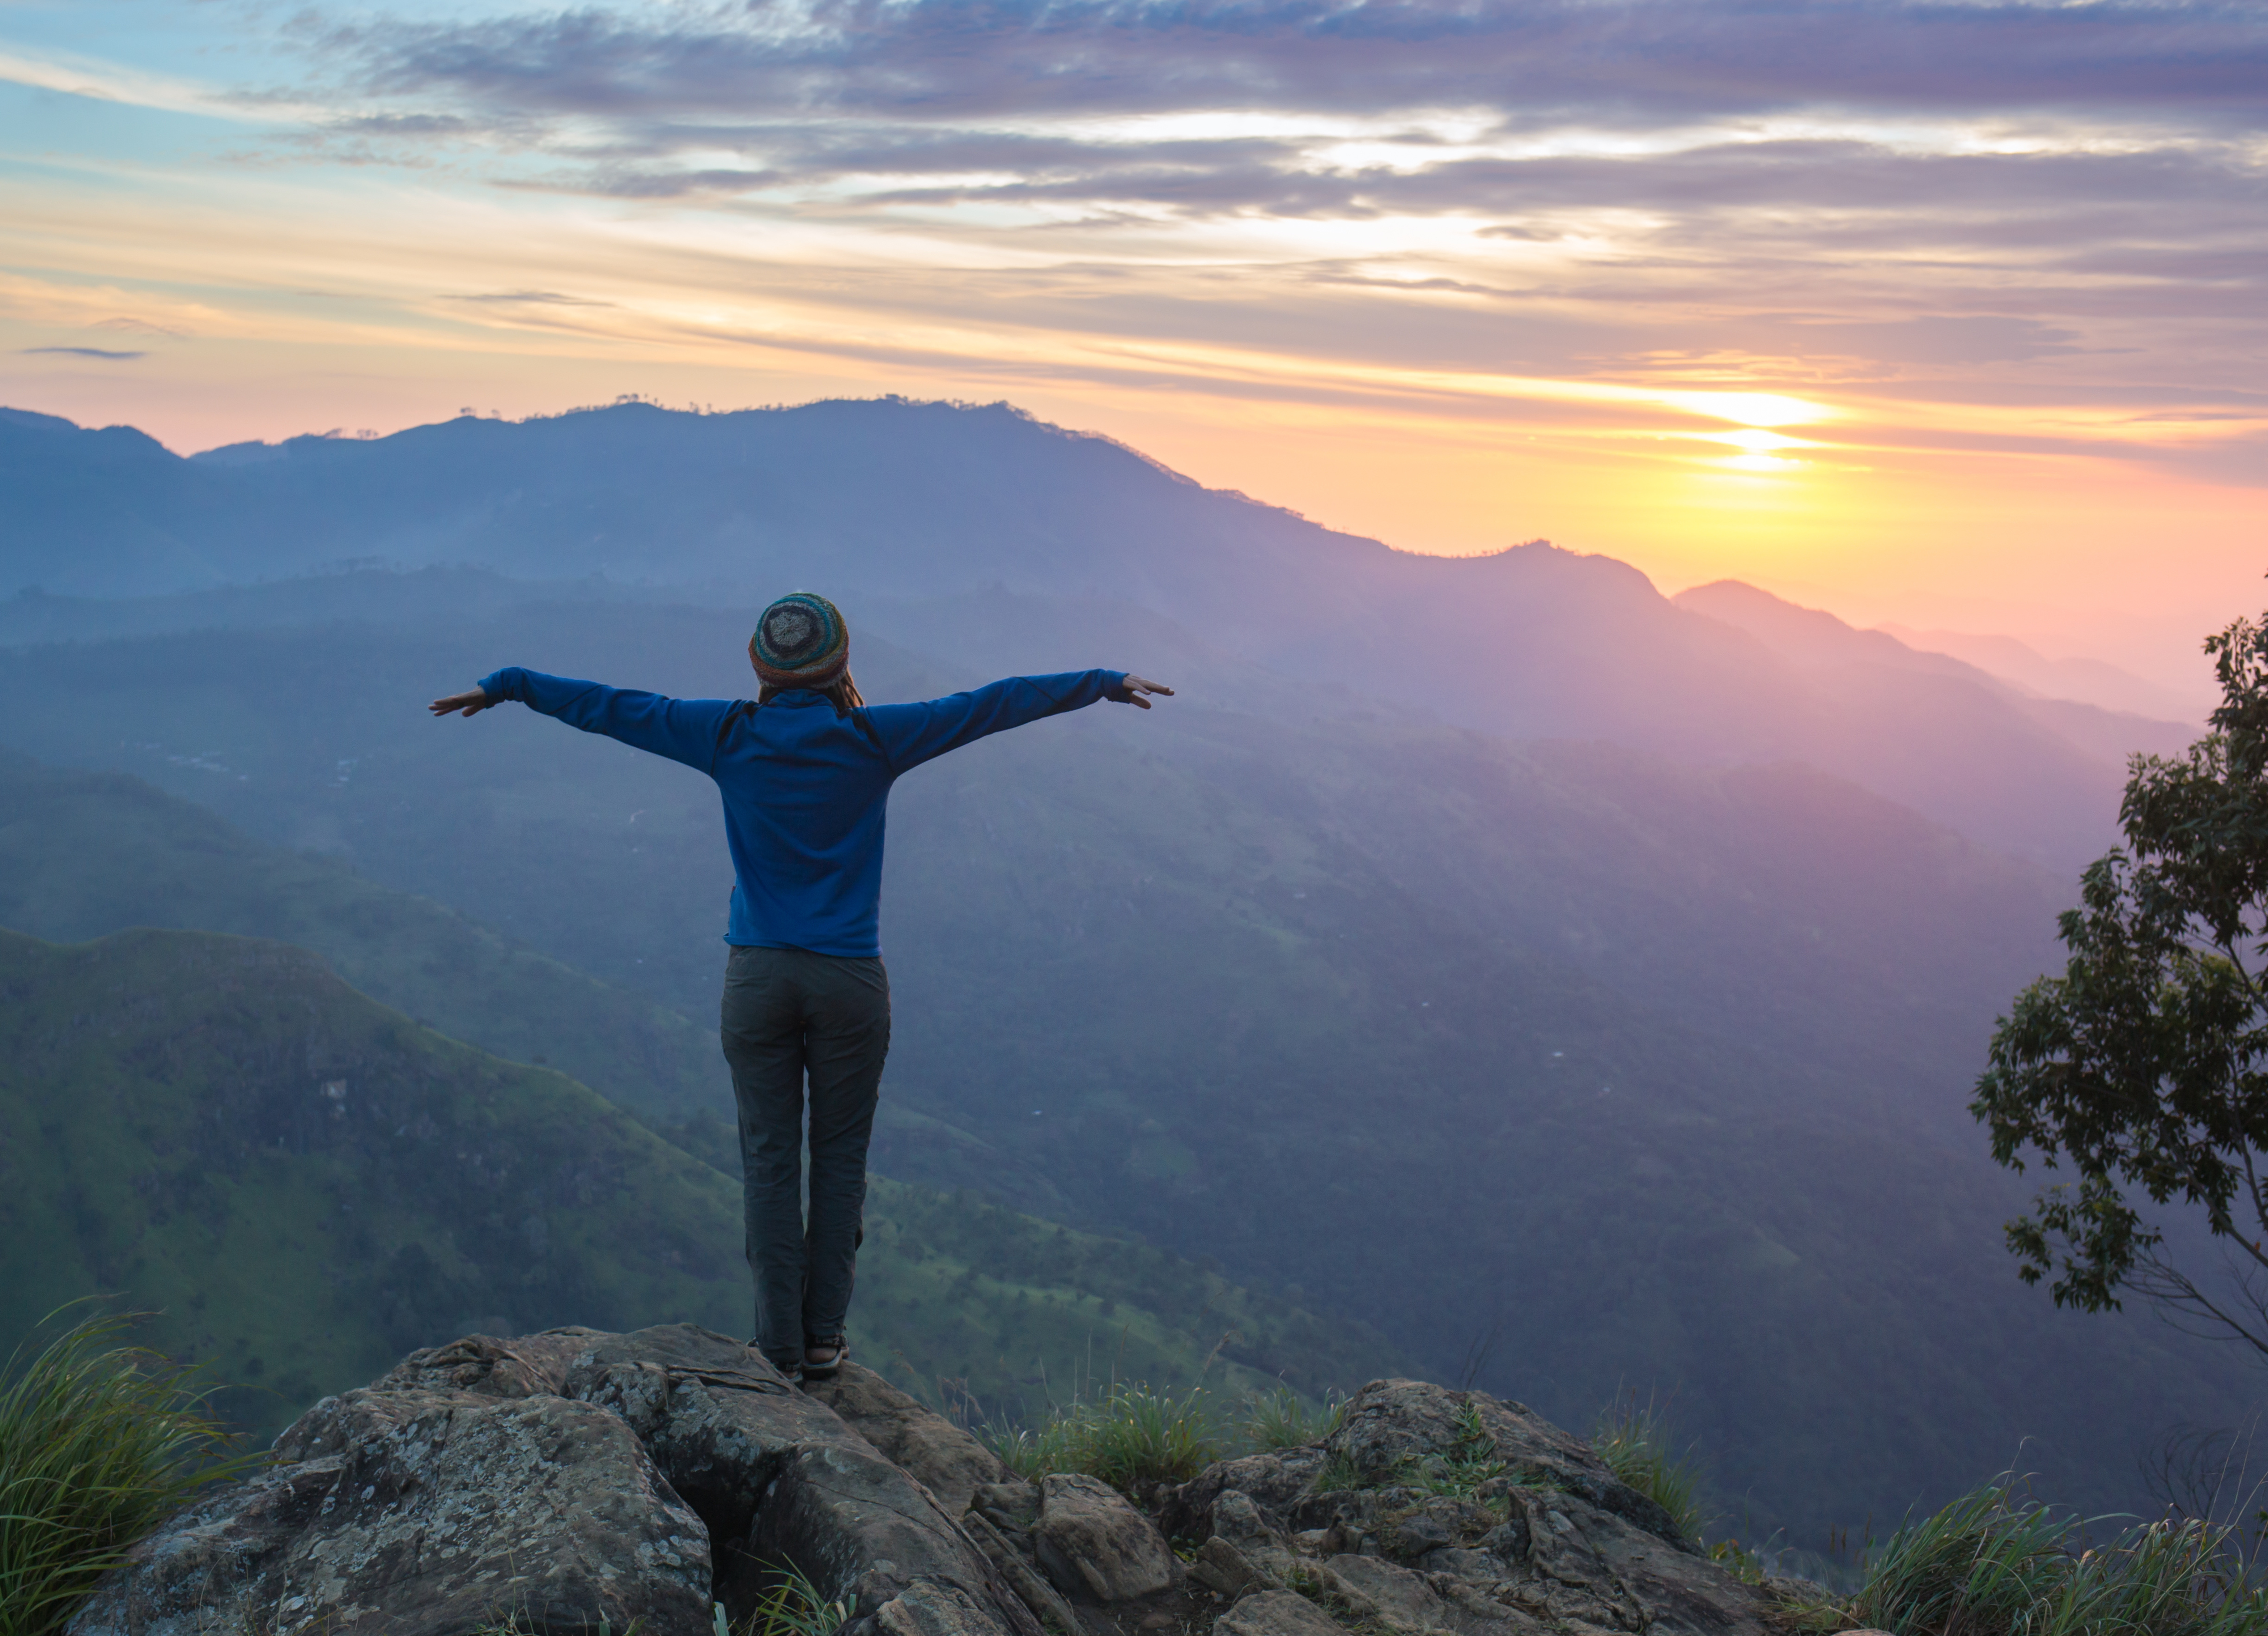 Woman traveling alone celebrating her hike at the top of a mountain